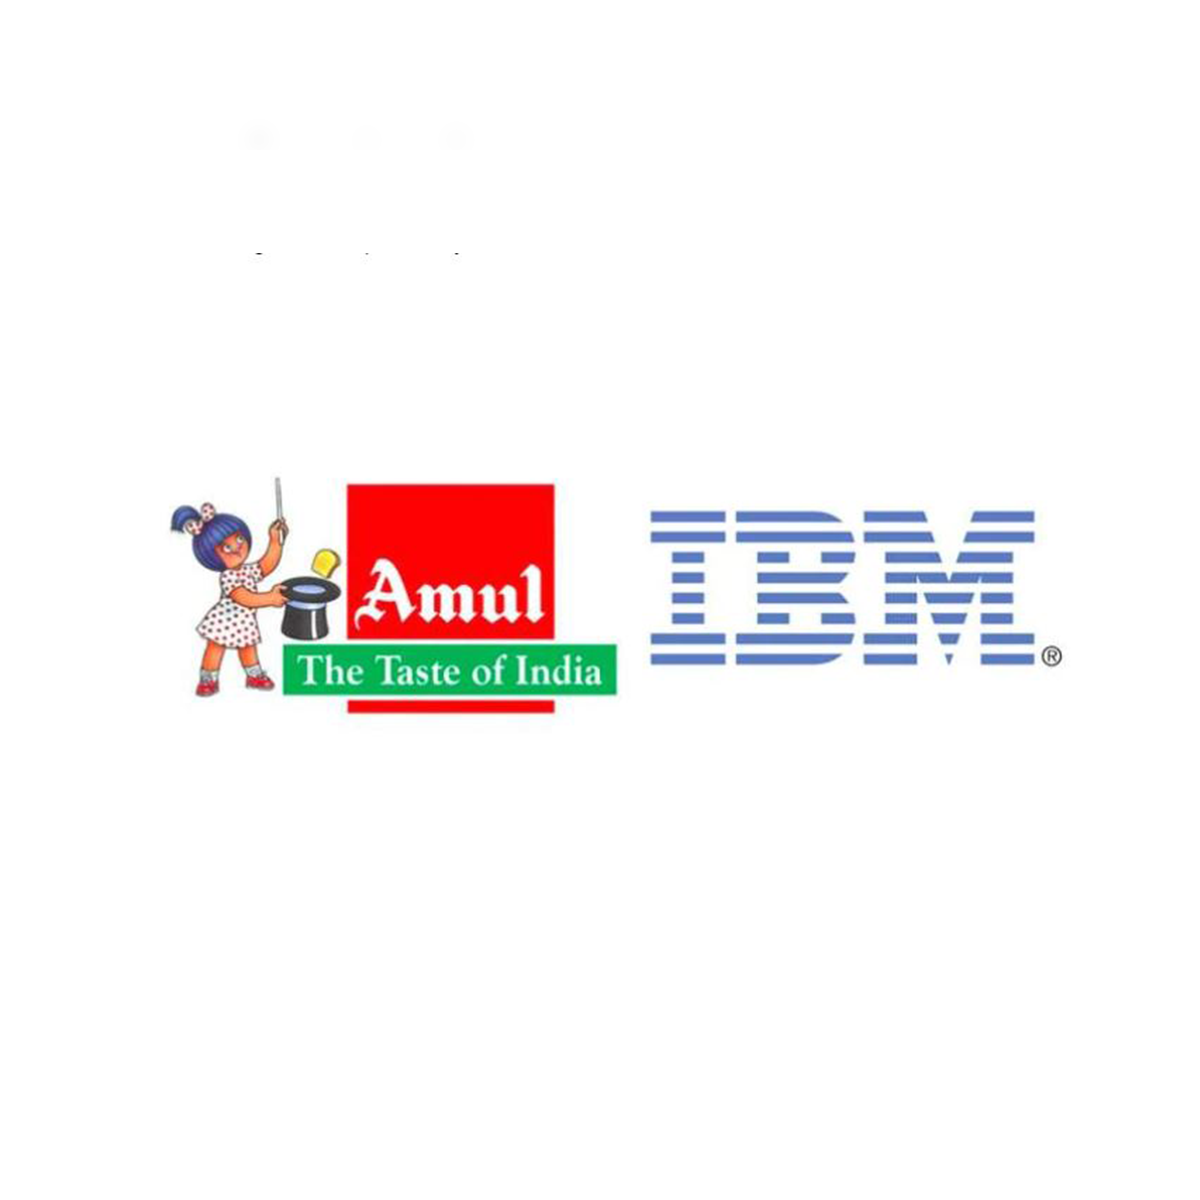 Has anyone noticed the Amul logo on New Zealand's team? Why is Amul  (India's company) sponsoring them? - Quora